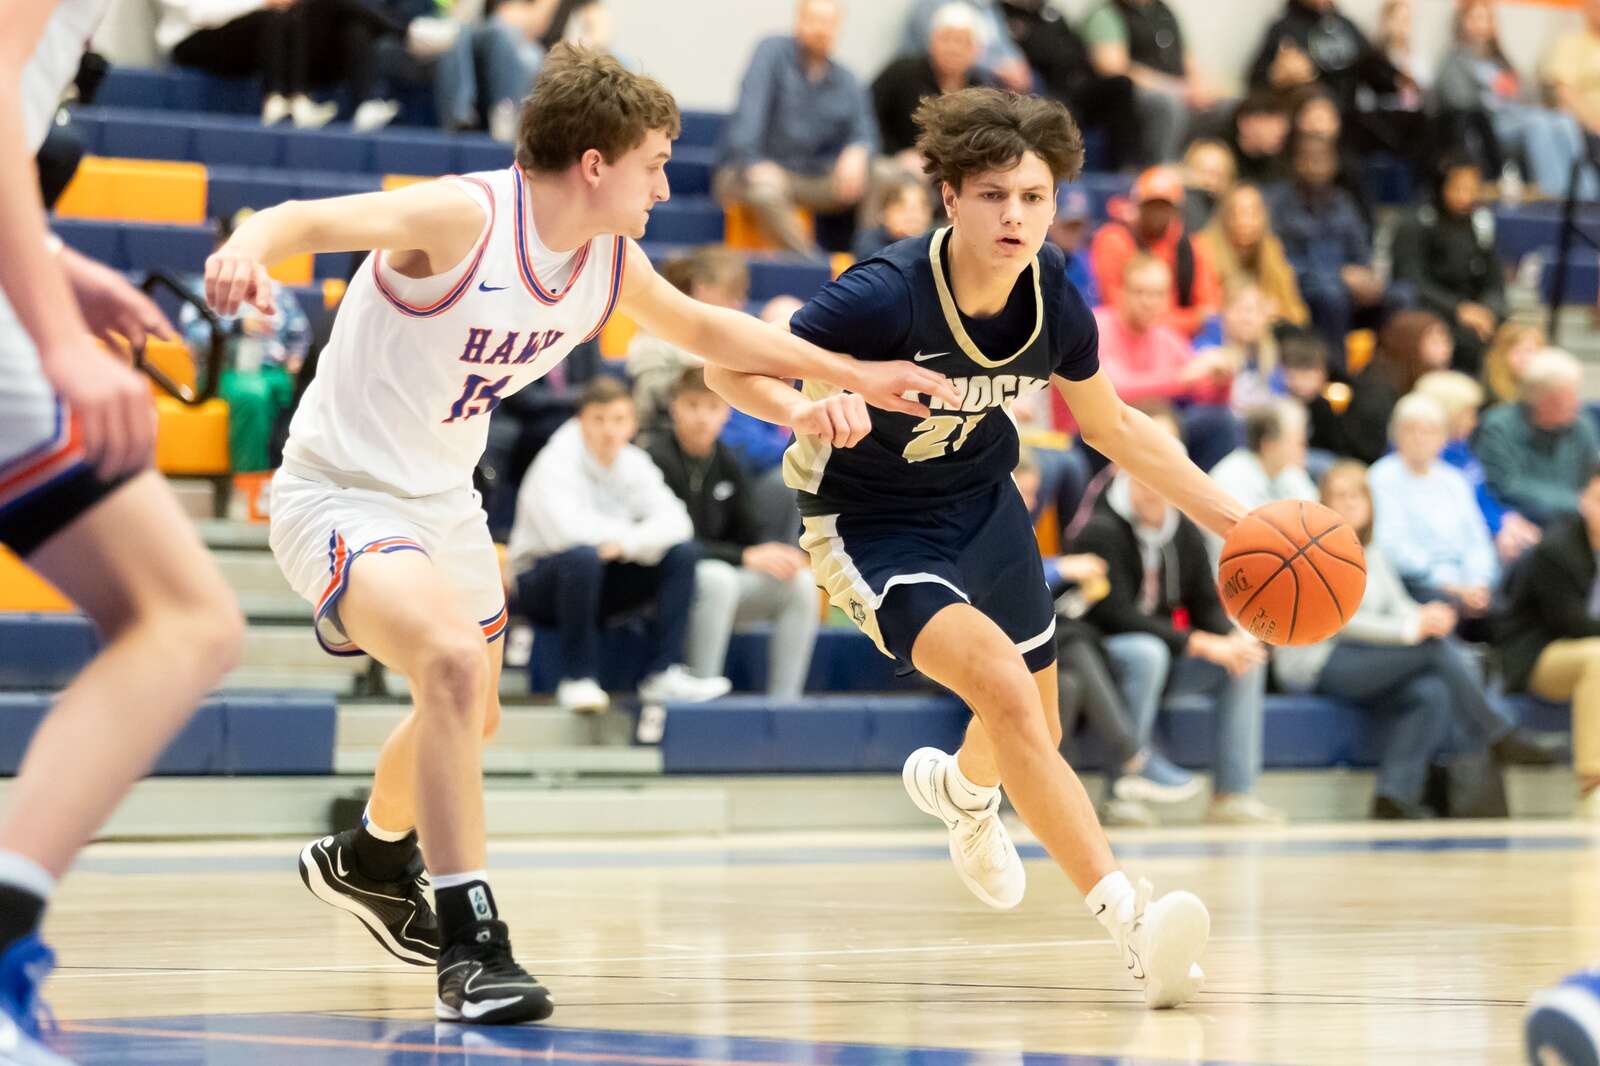 Knoch’s Zarian Finucan dribbles through the defense of Armstrong’s Jack Valasek